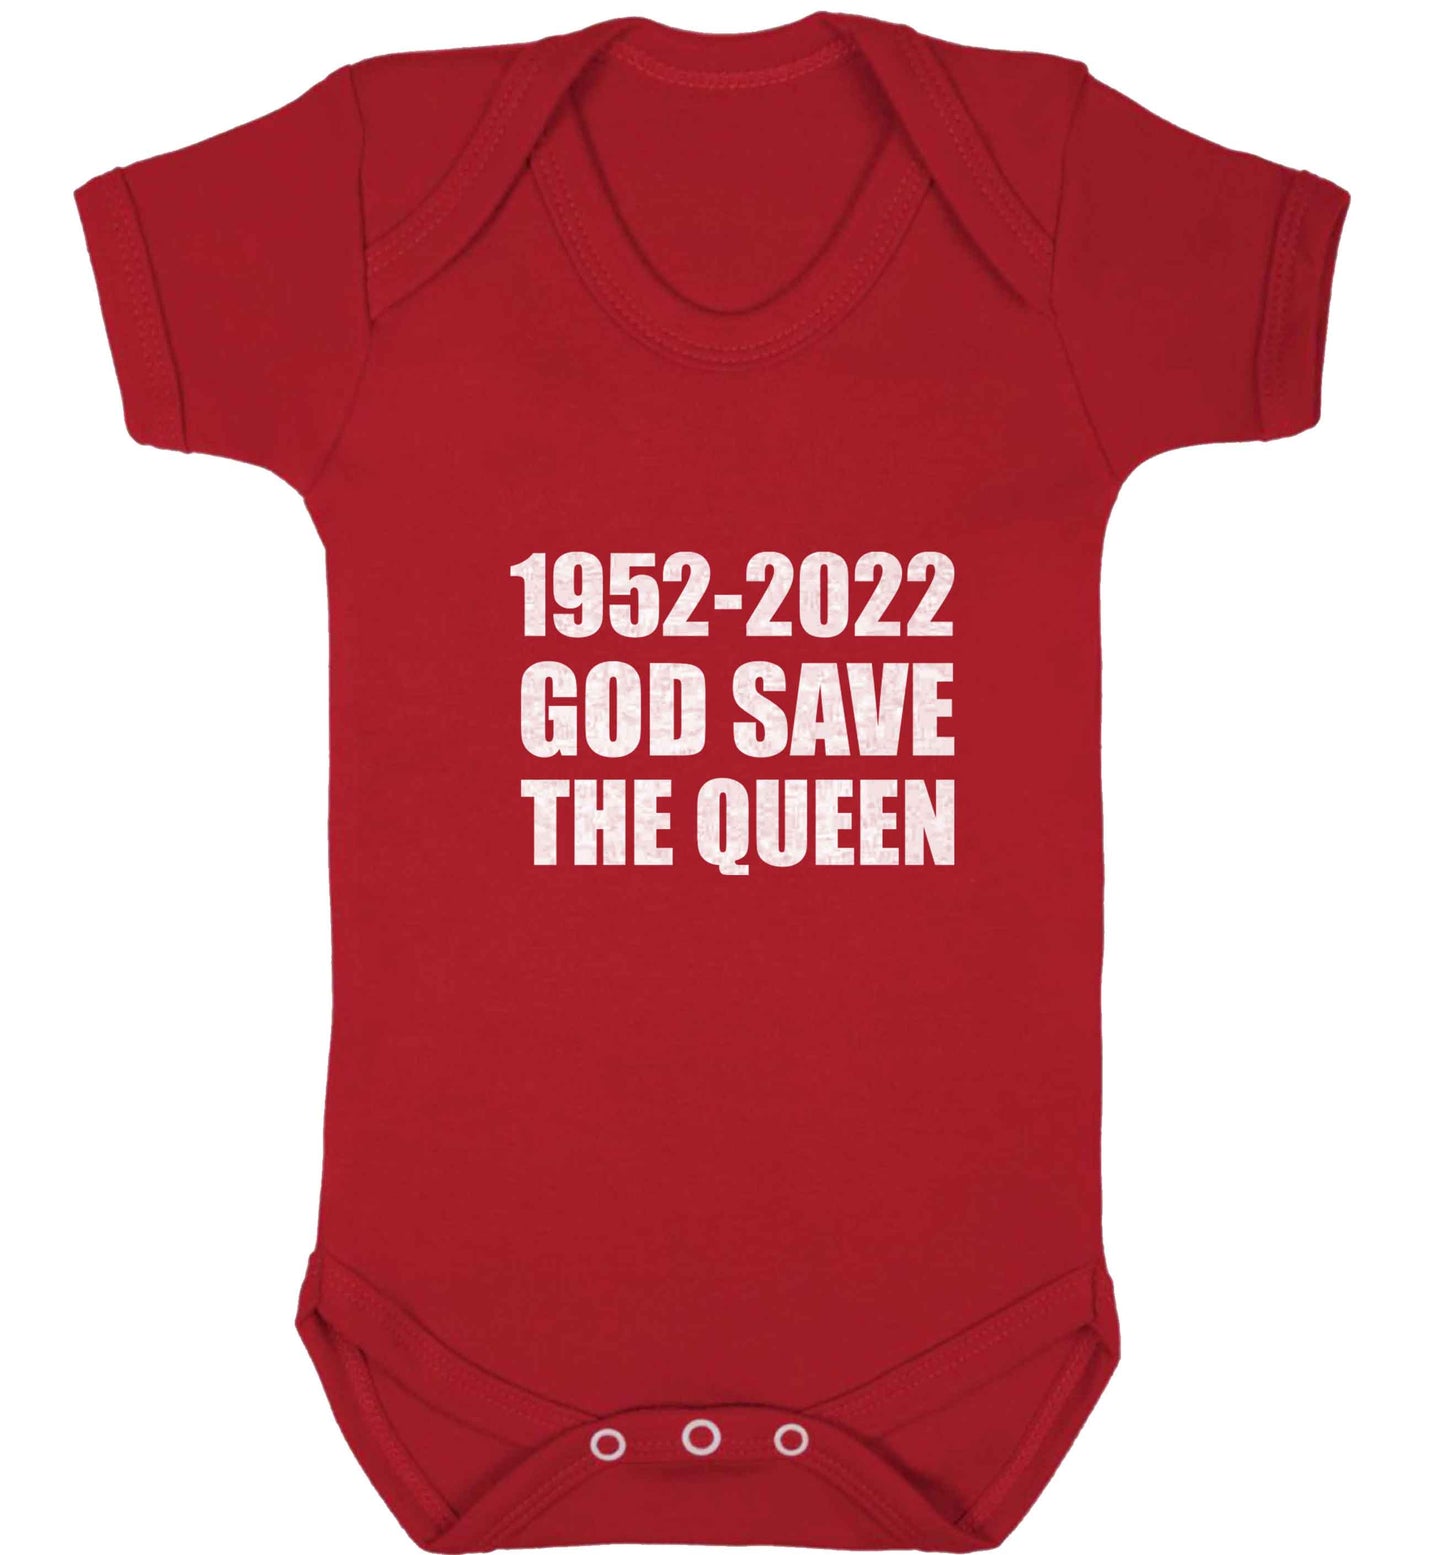 God save the queen baby vest red 18-24 months